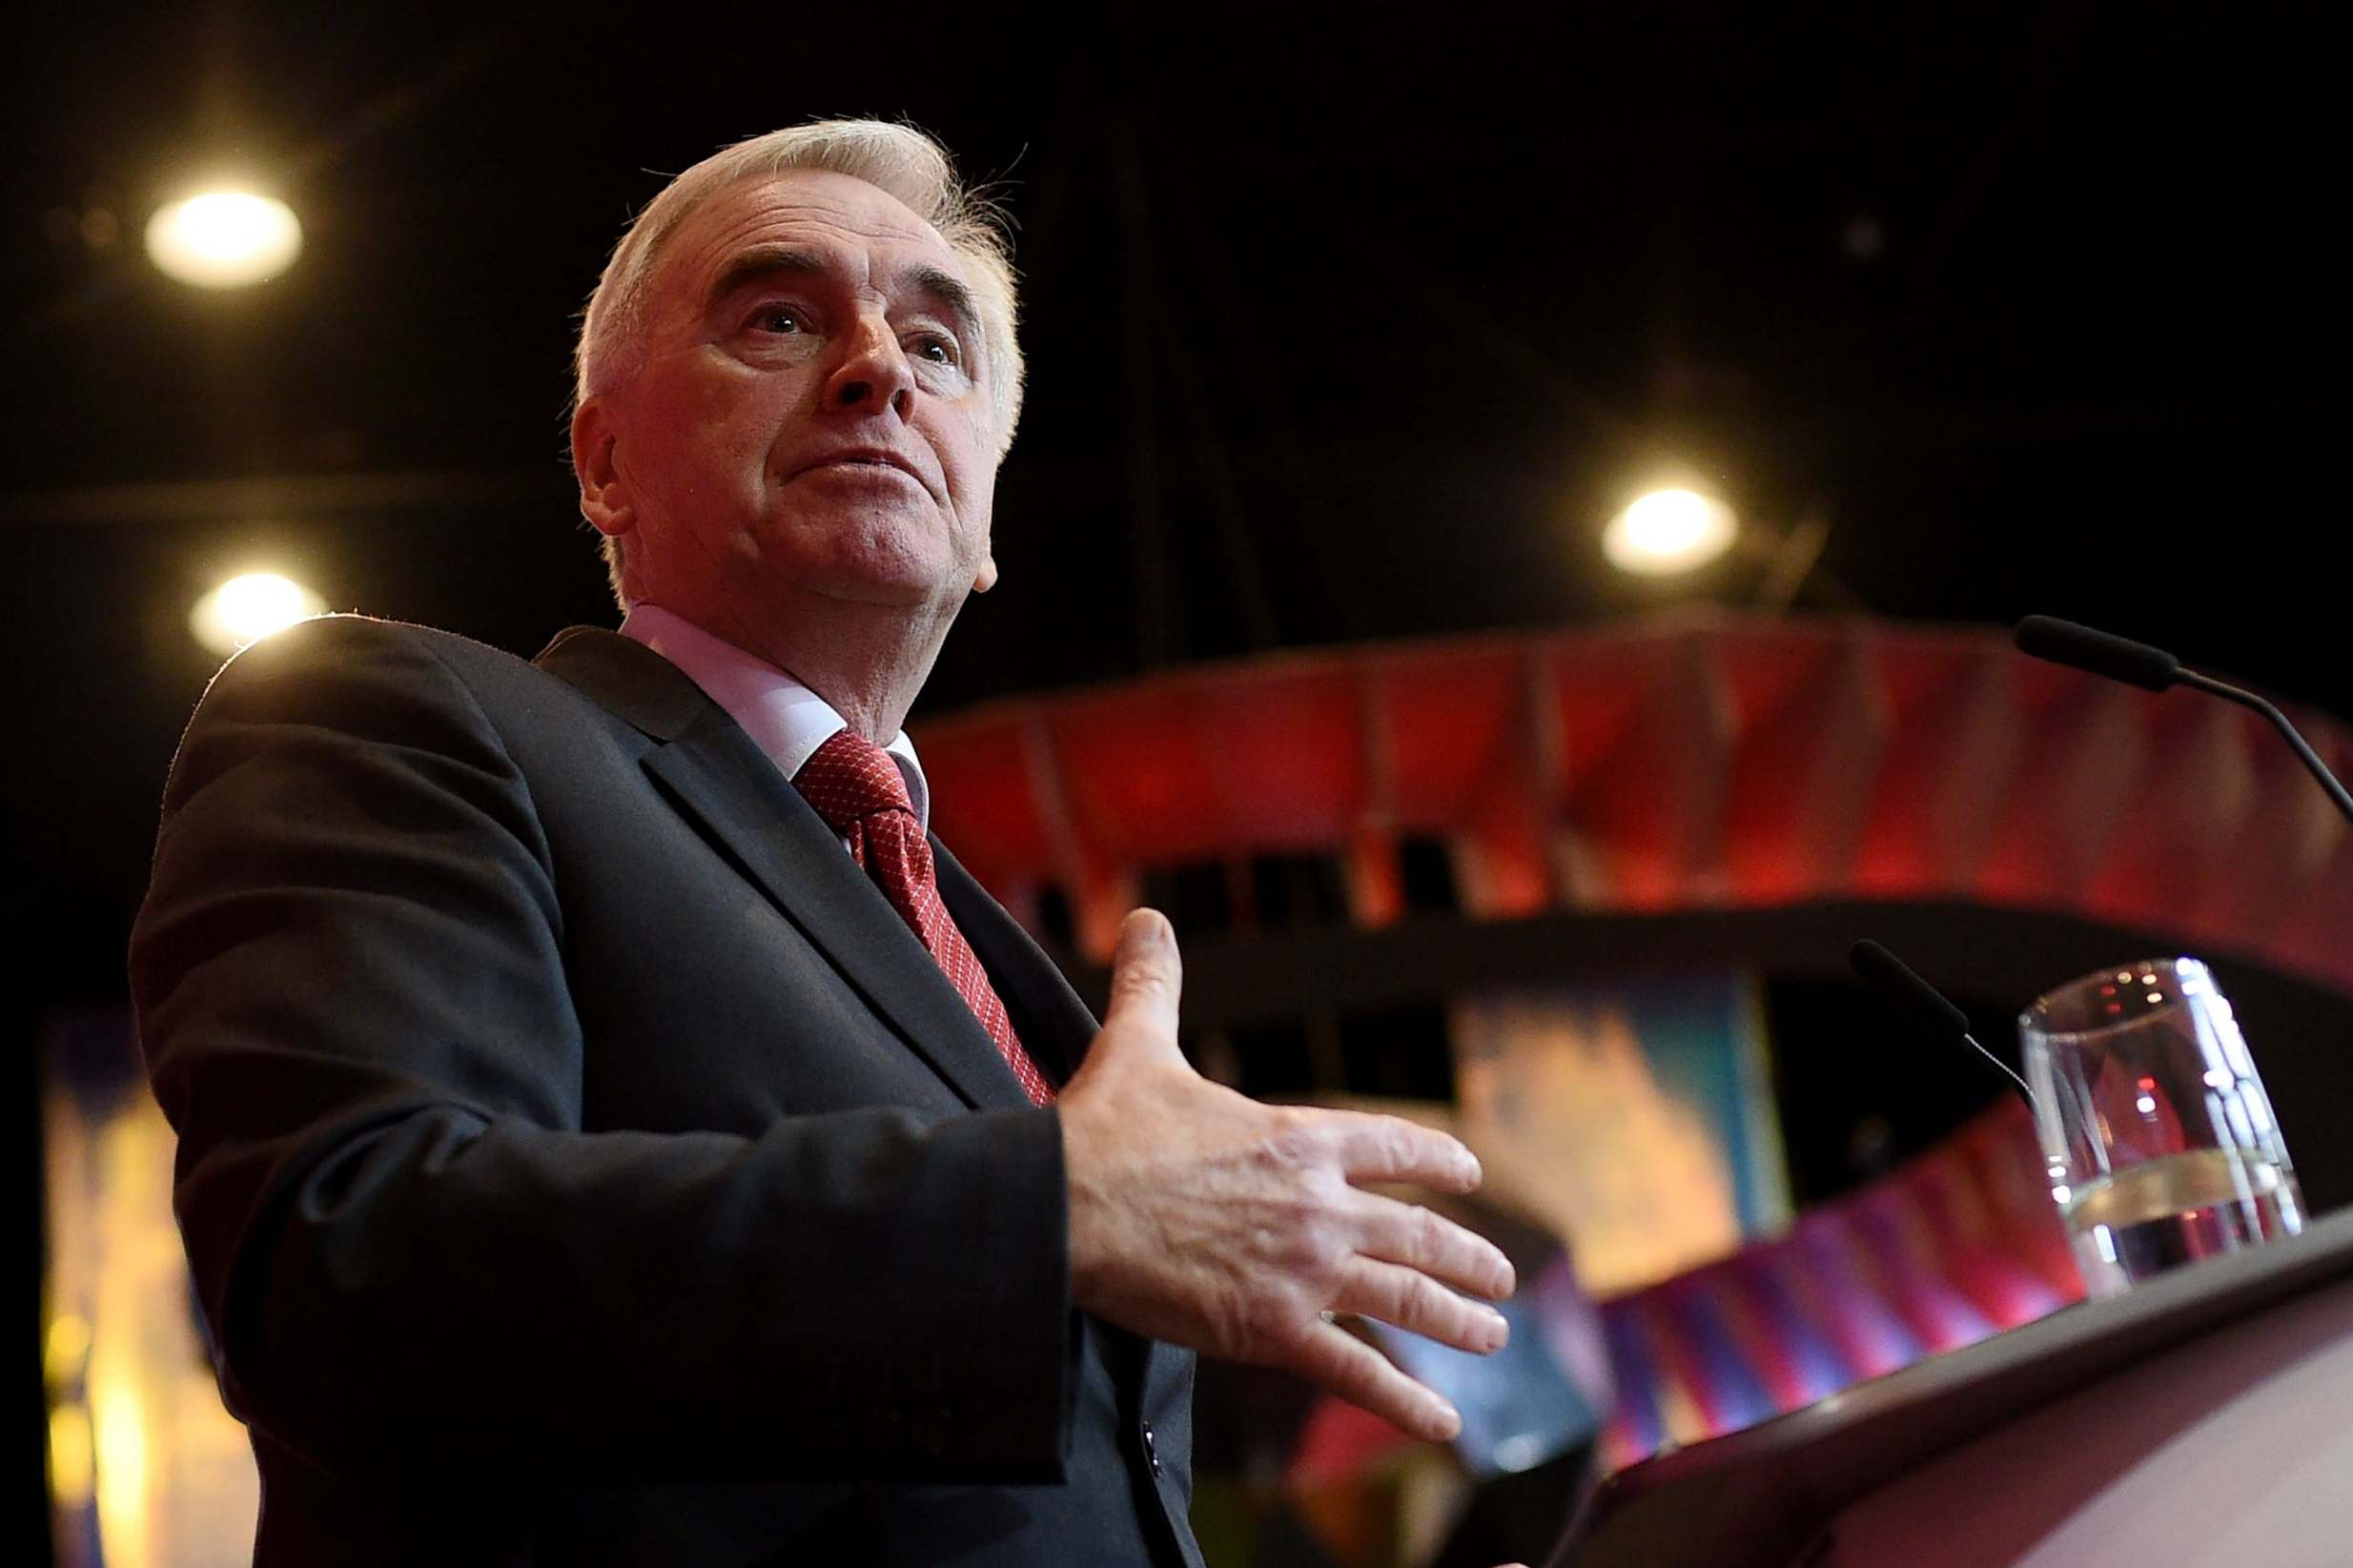 McDonnell and Corbyn are both stepping away – but not without leaving an ideological successor behind